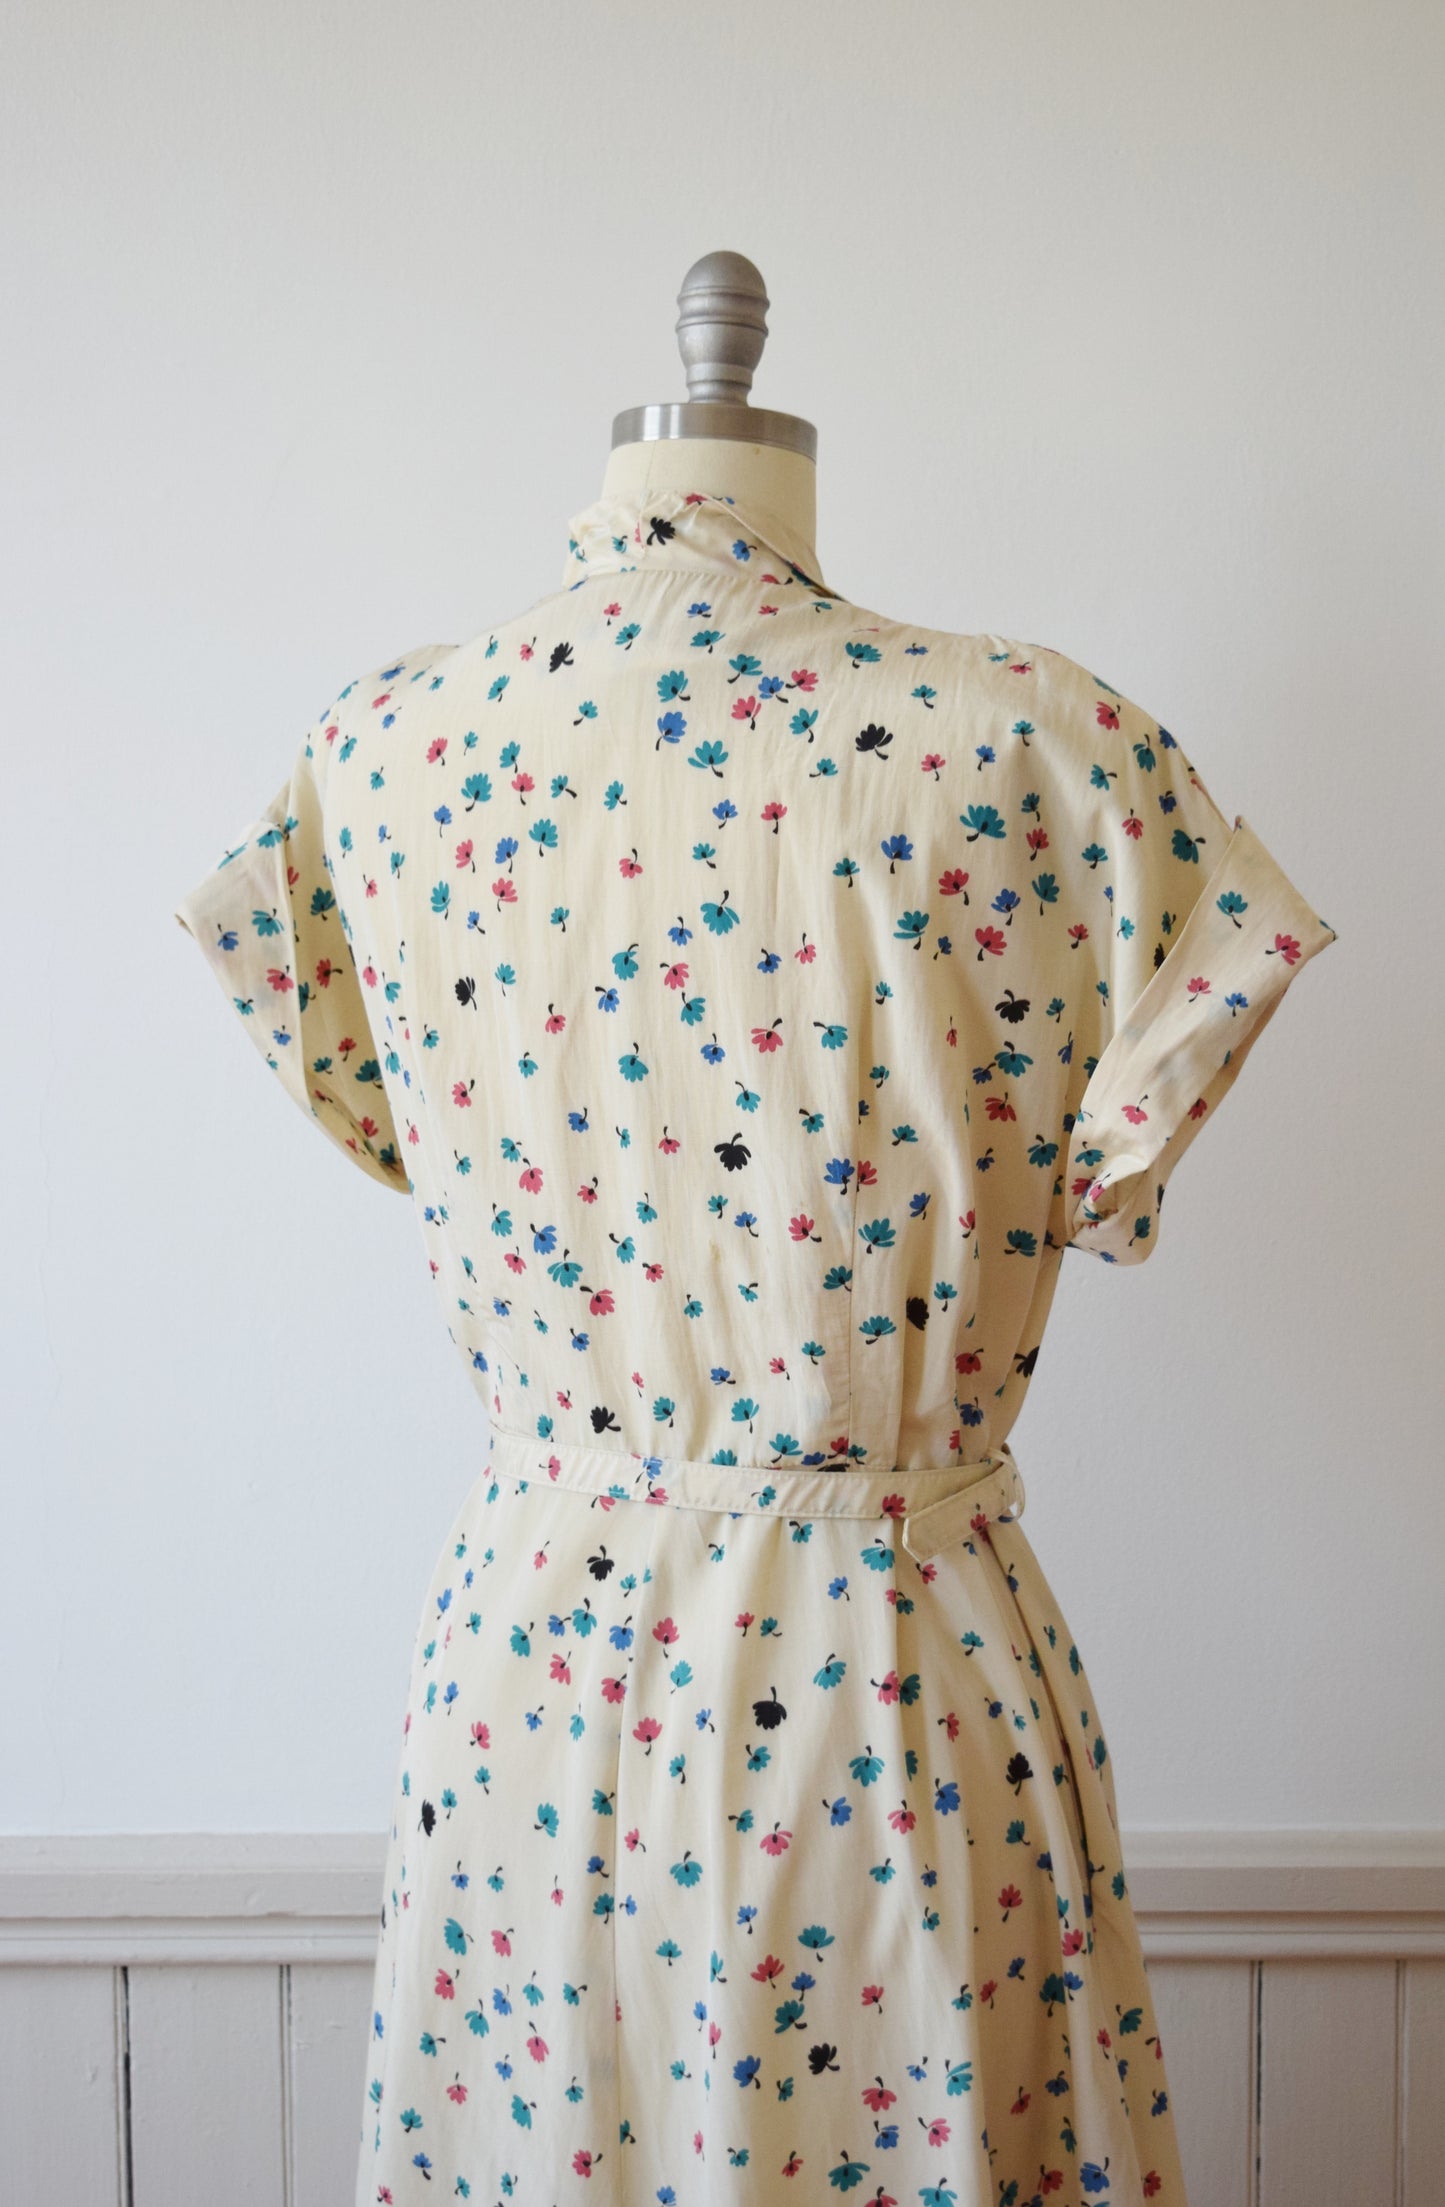 Early 1950s Fruit of the Loom Day Dress